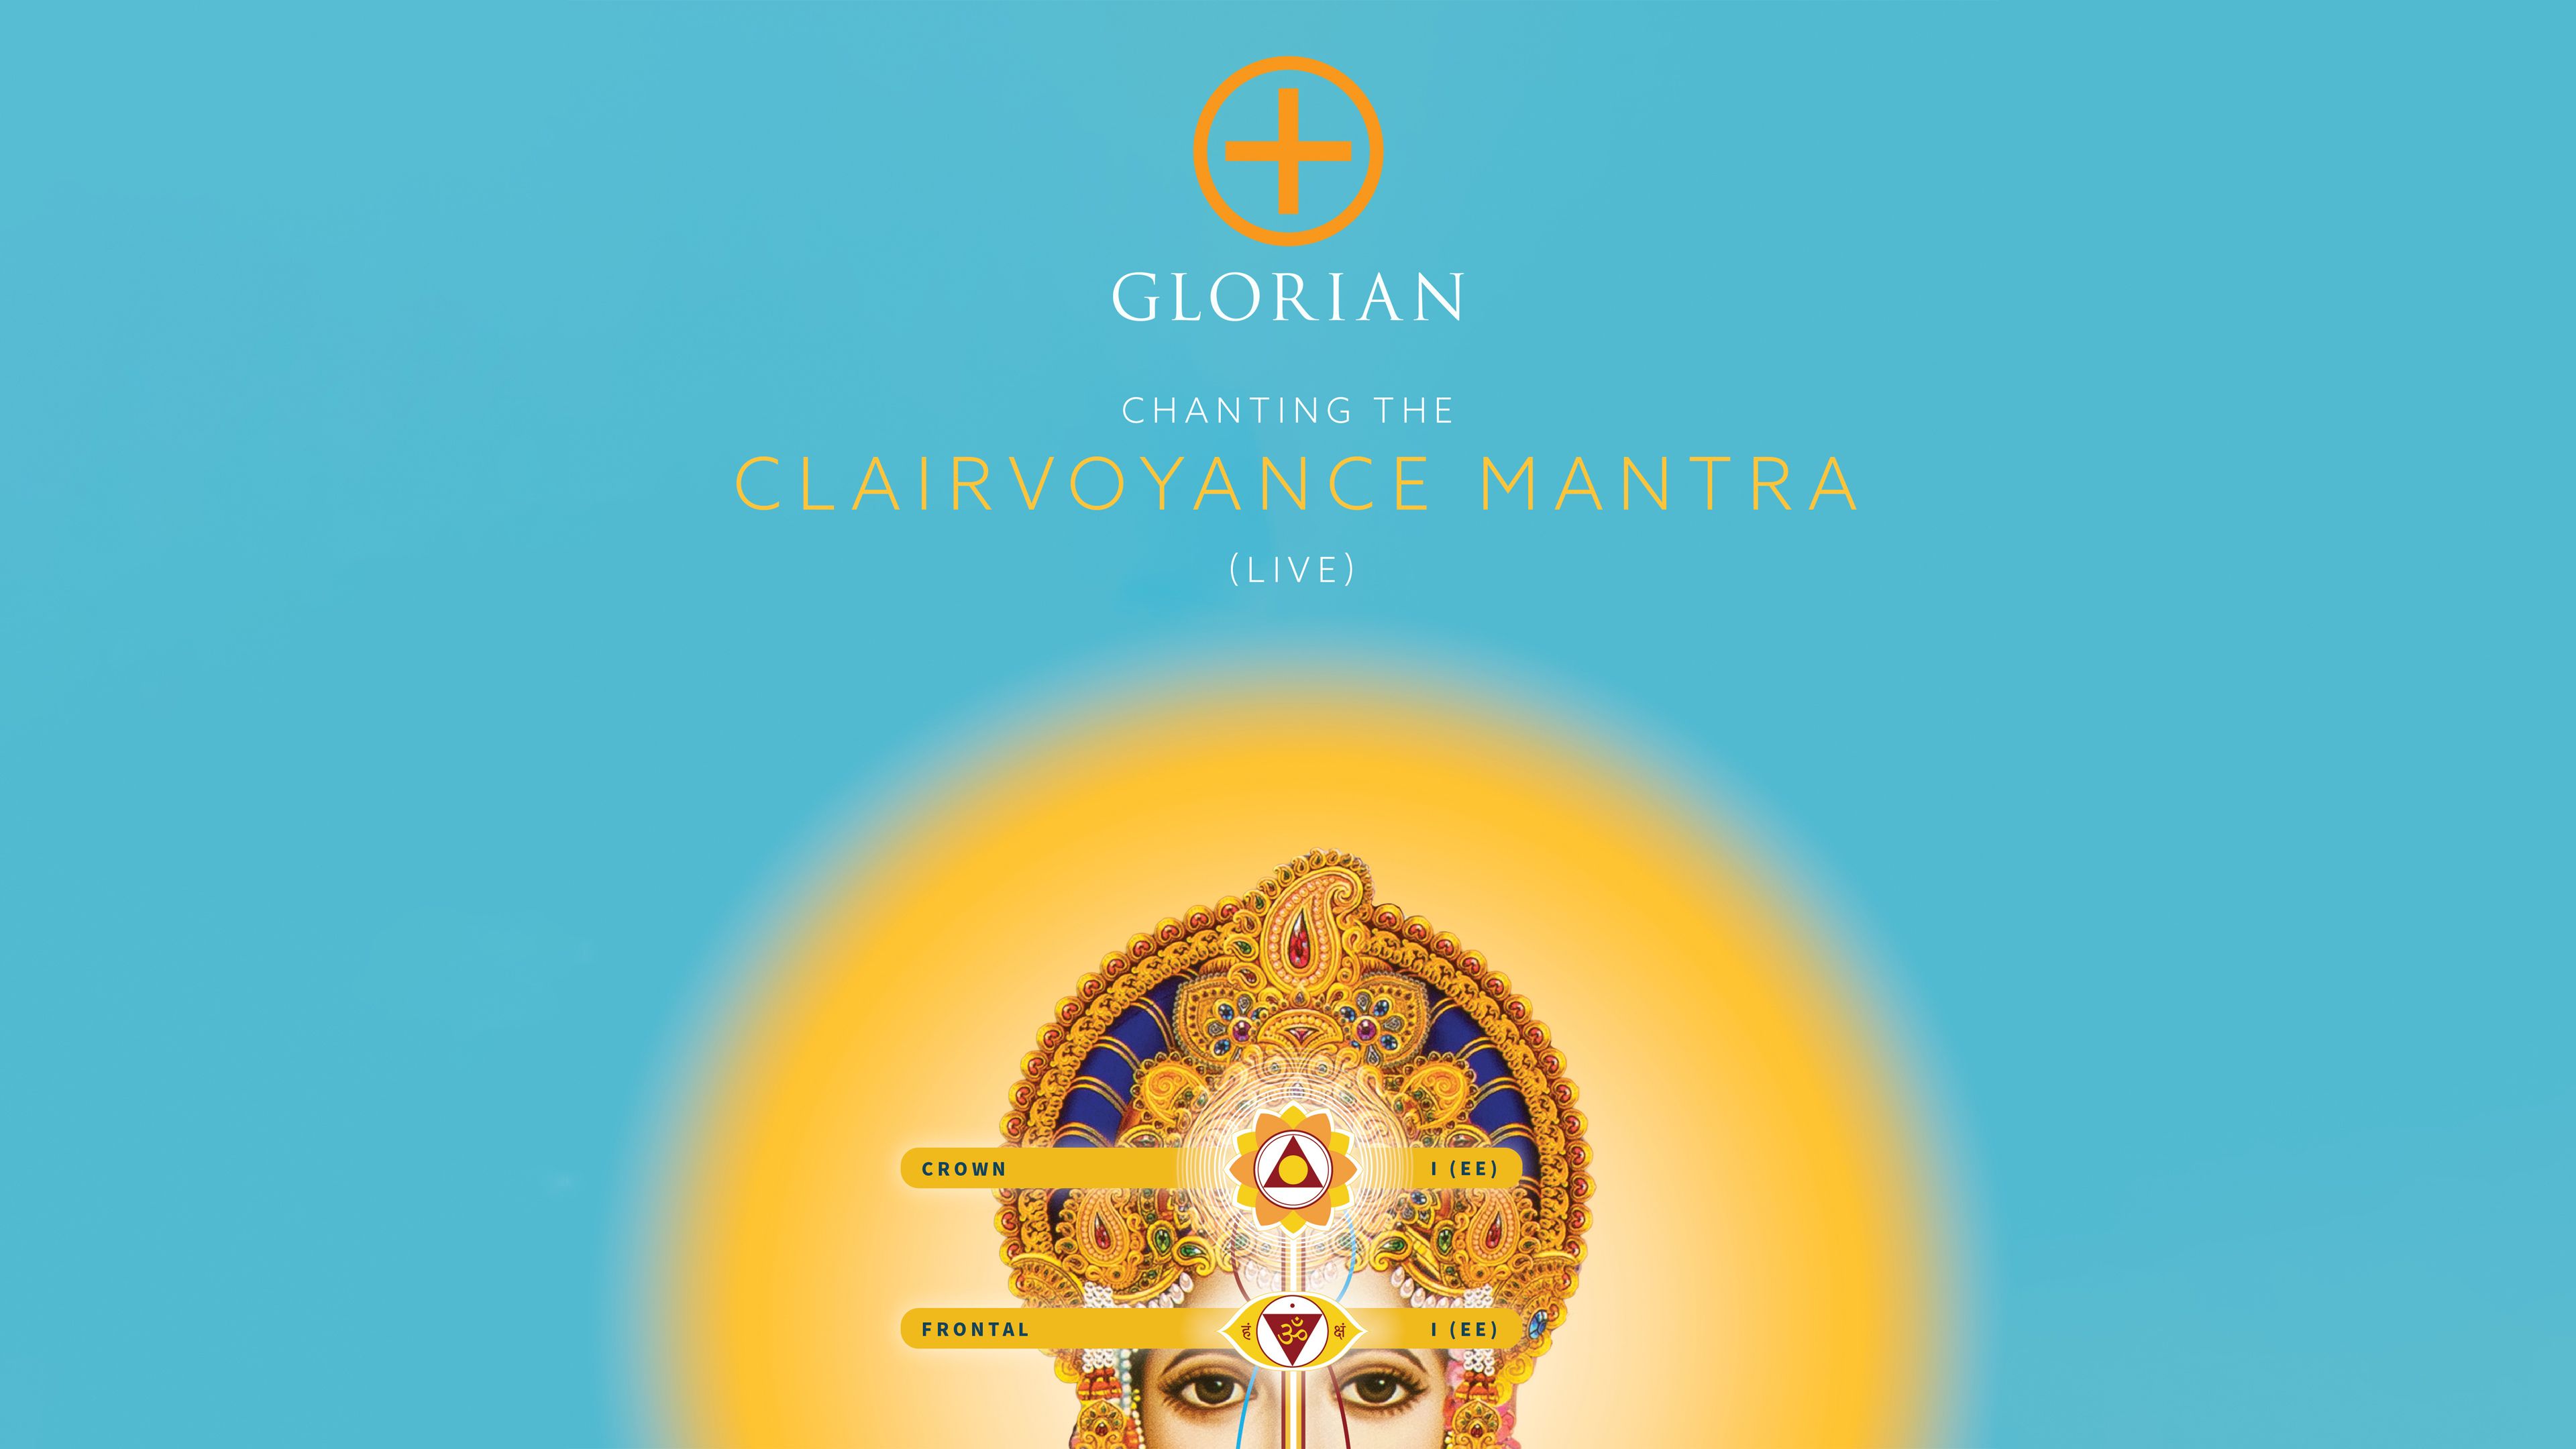 Use This Clairvoyance Mantra to See Internal Images